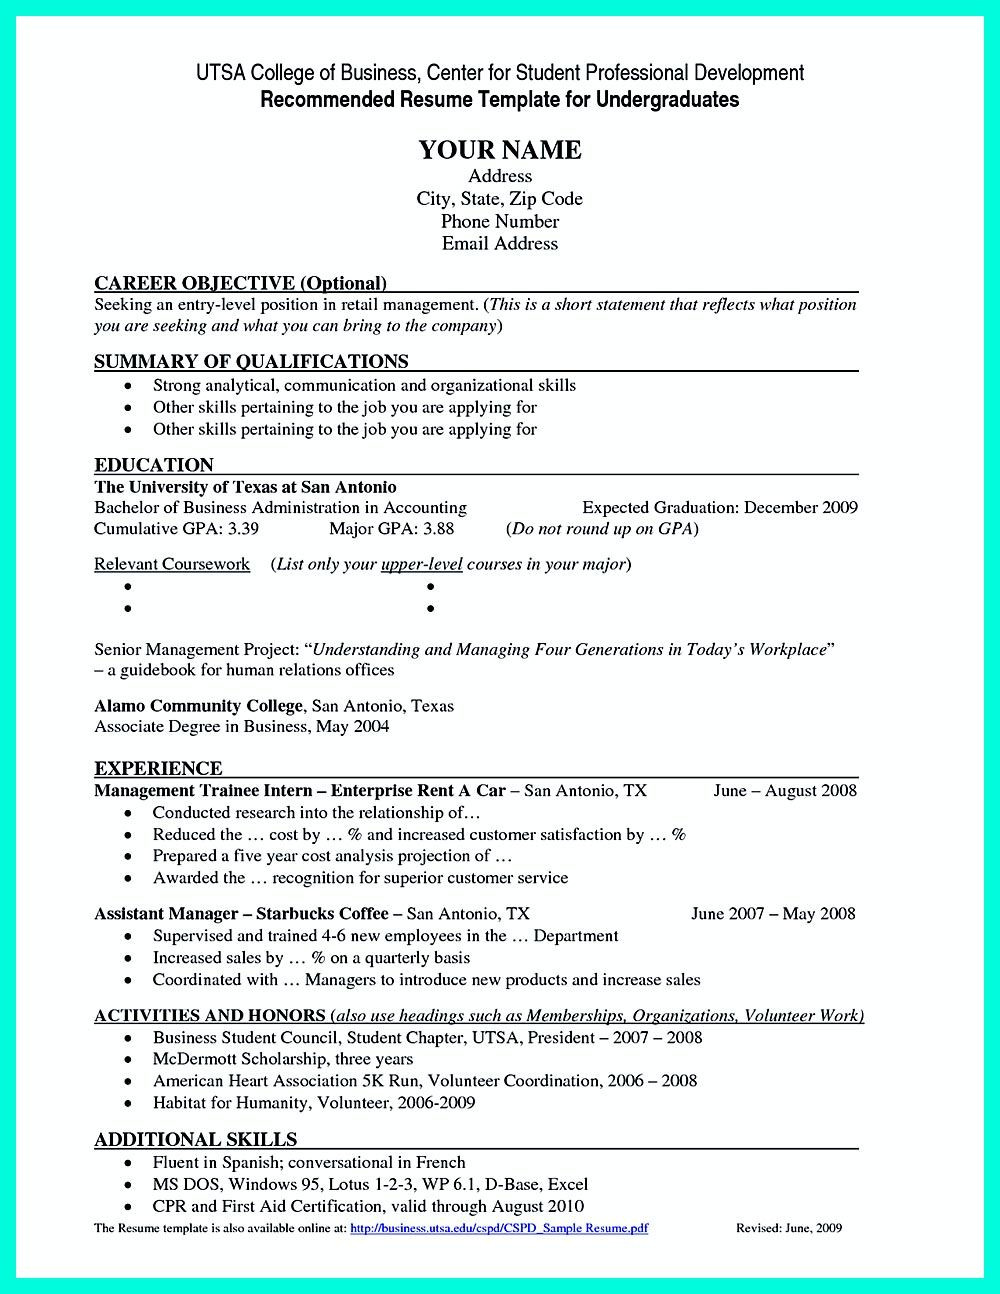 Sample Resume for College Student with No Experience Best Current College Student Resume with No Experience Job …